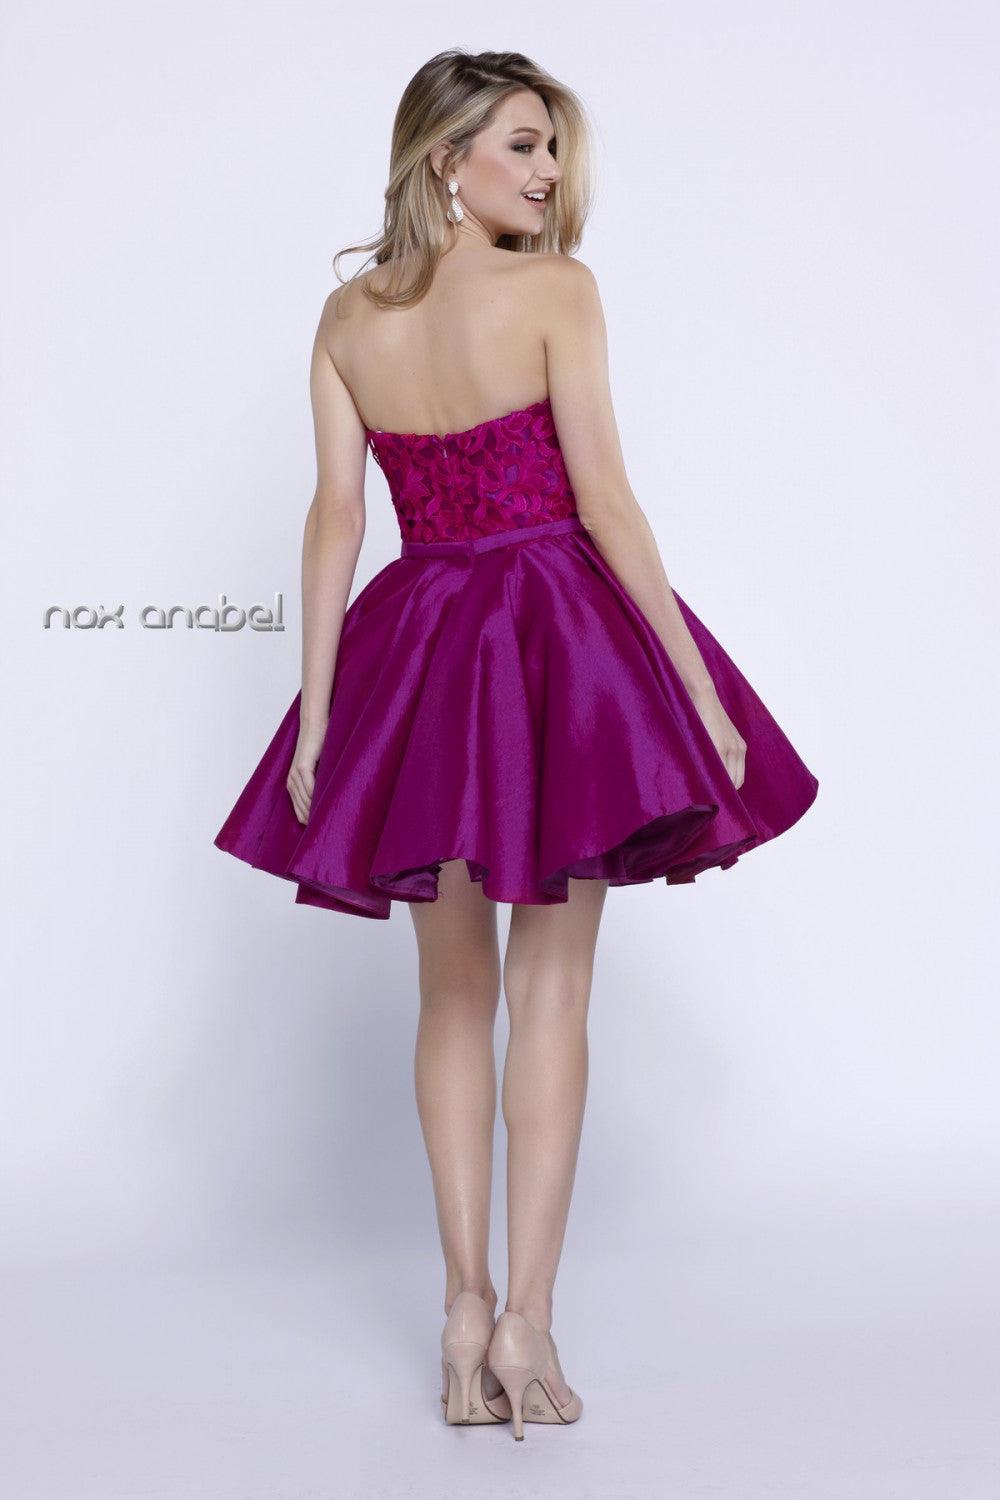 Short Strapless Formal Prom Homecoming Dress - The Dress Outlet Nox Anabel